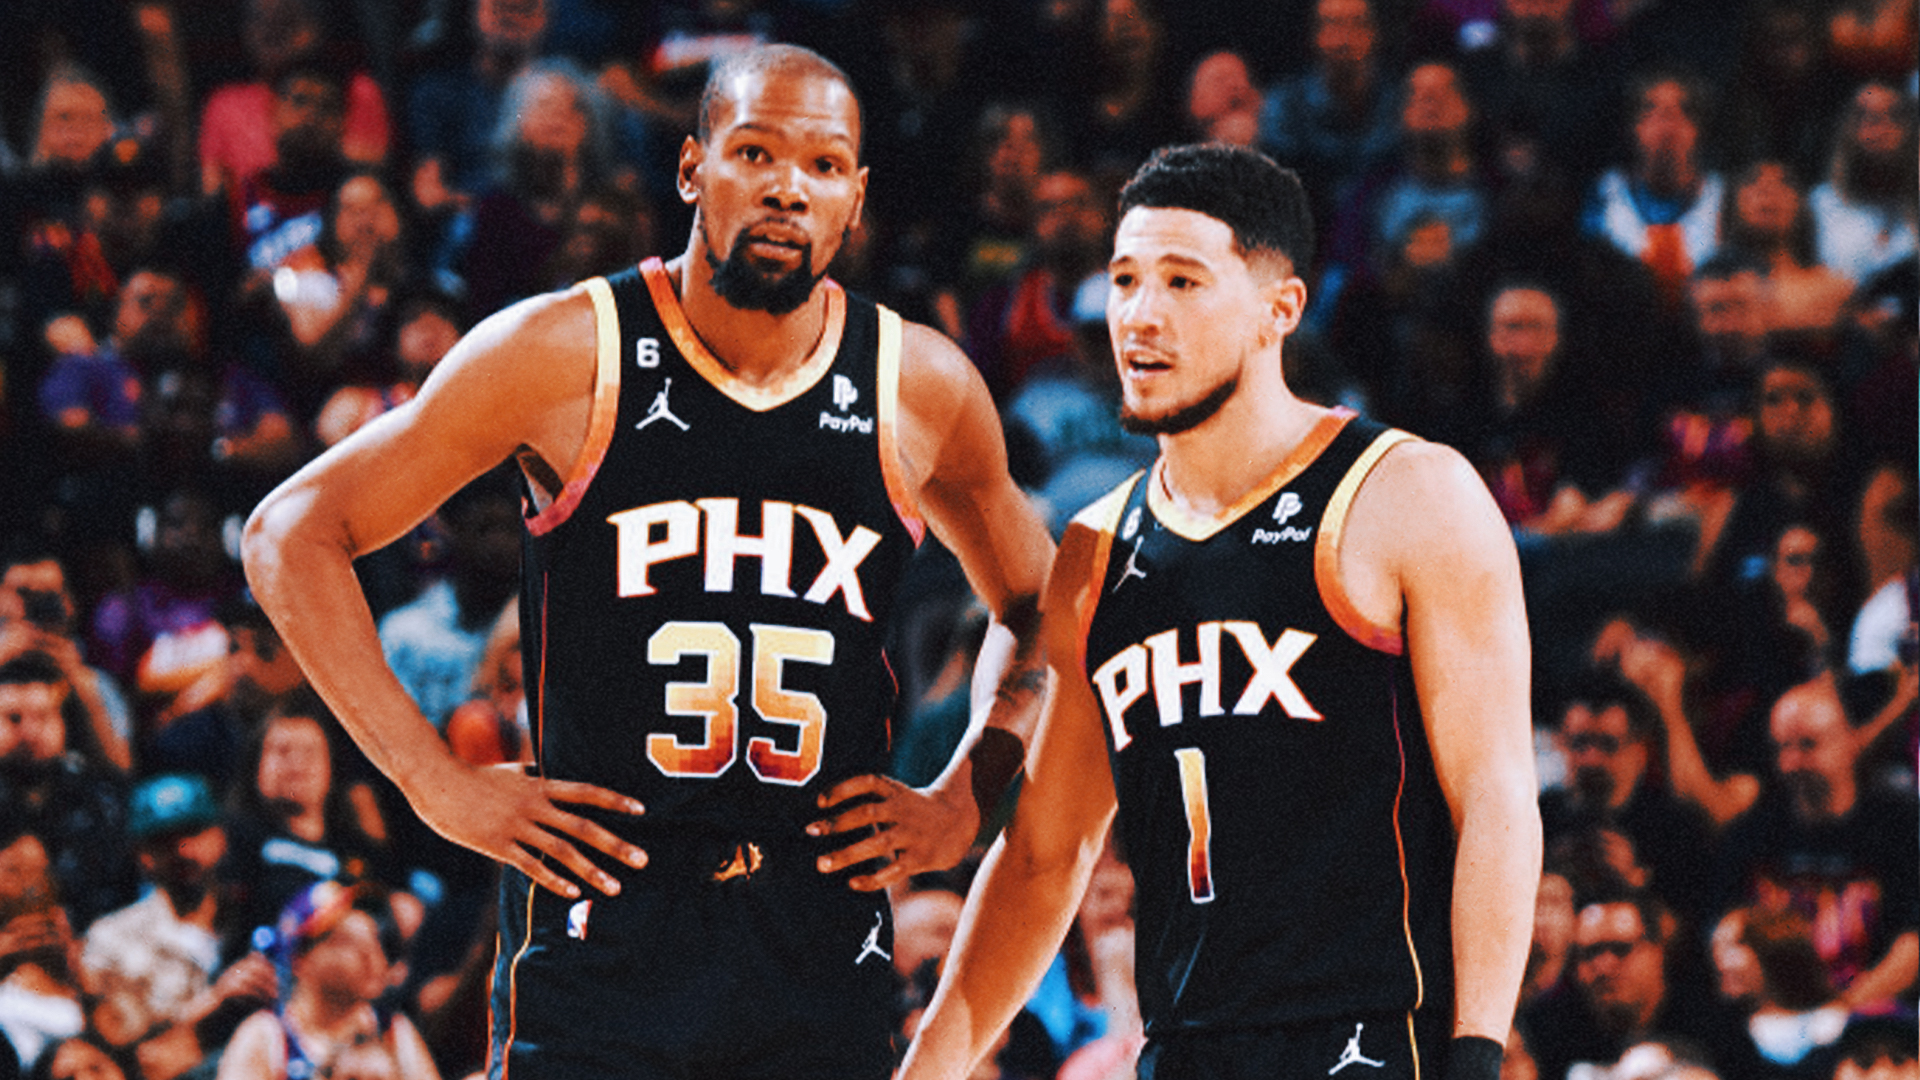 Can Suns overcome depth issues against Clippers?